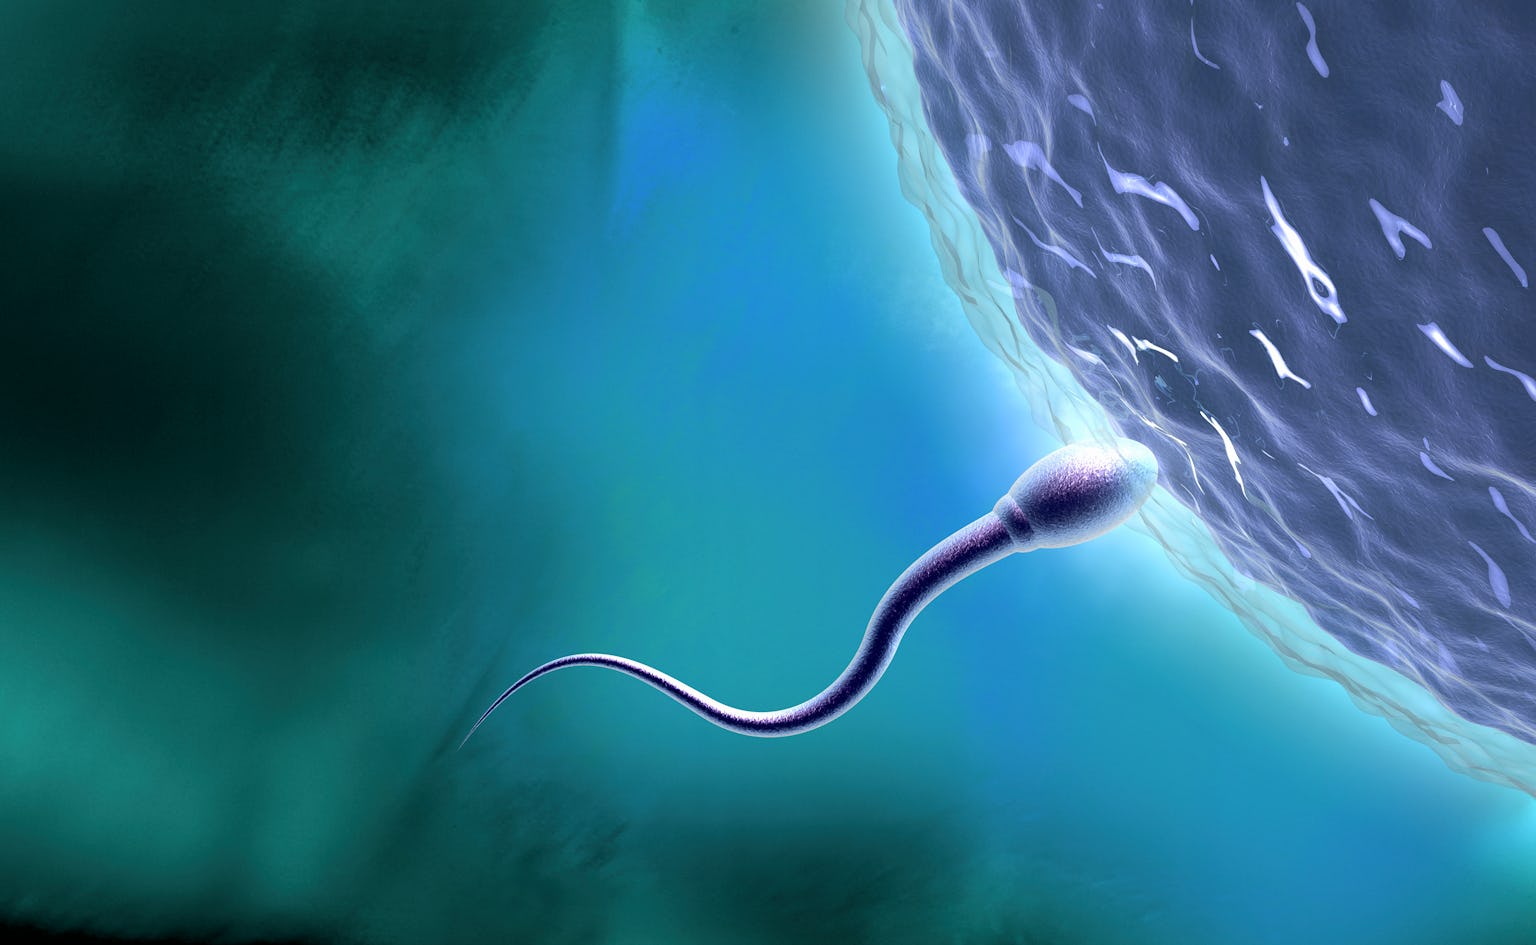 Is bigger always better? Scientists explain the evolution of sperm size